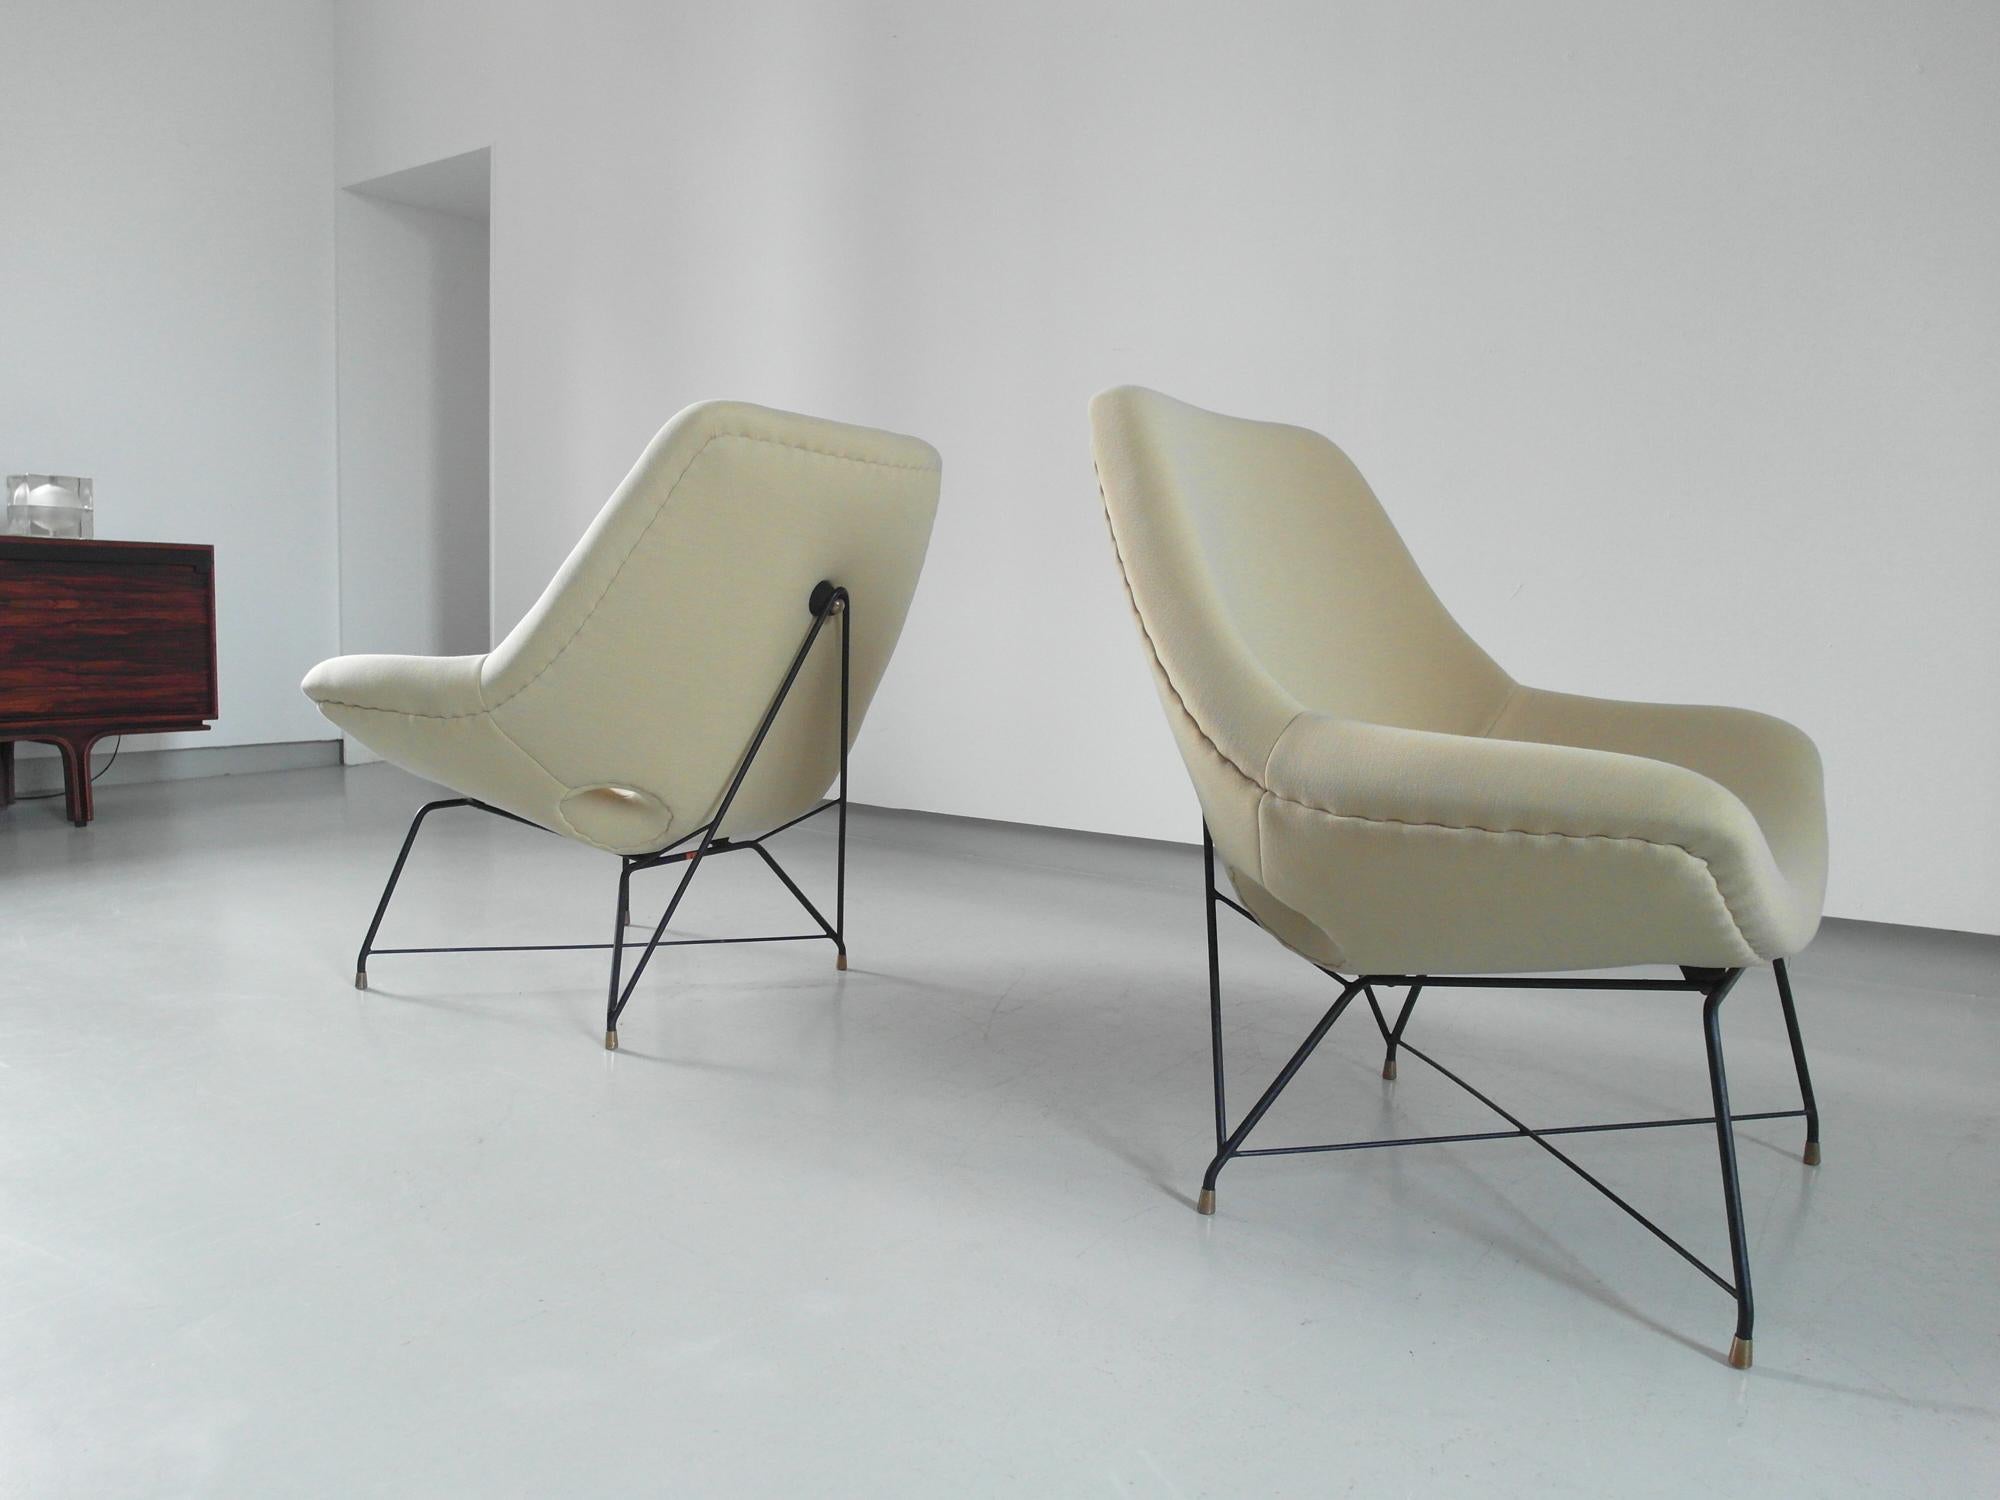 Sculptural Pair of Lounge Chairs by Augusto Bozzi for Saporiti, Italy, 1954 For Sale 1